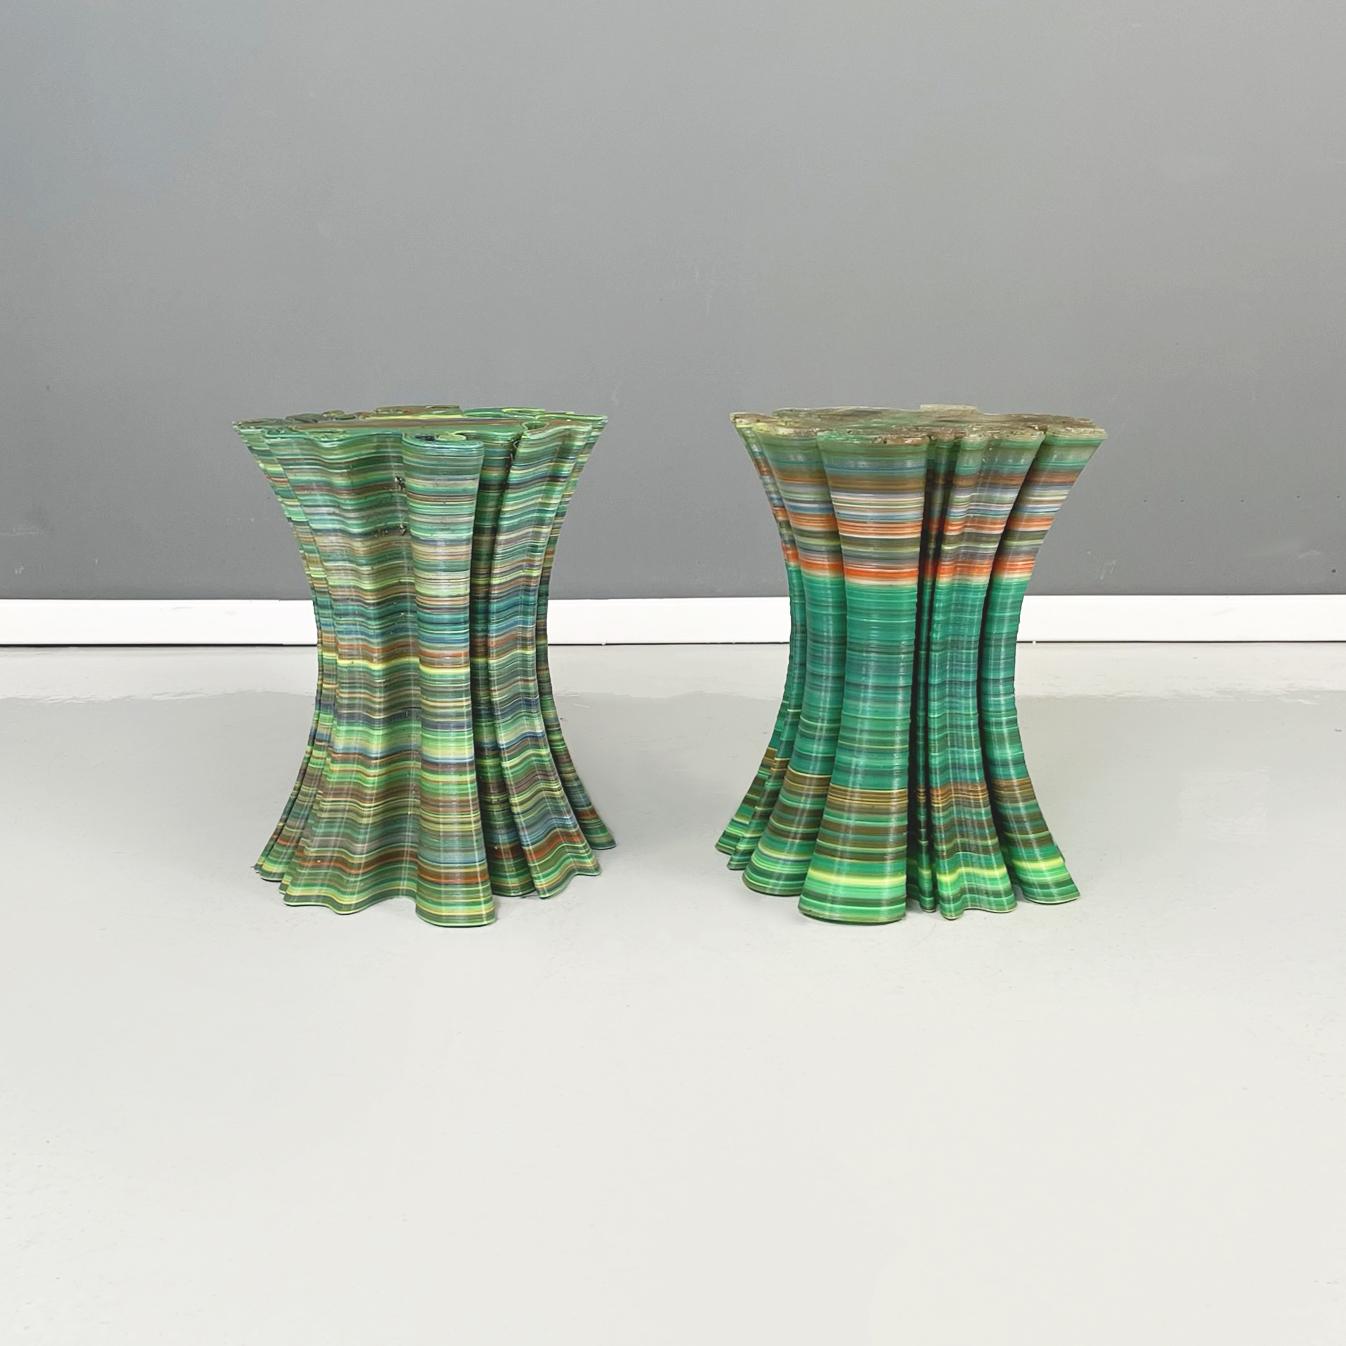 Italian post-modern Garden stools or coffe tables in colored plastic, 2000s
Pair of coffee tables of irregular shape, entirely in plastic of different shades: green, yellow, orange and blue. The table narrows in the center and widens at the ends.